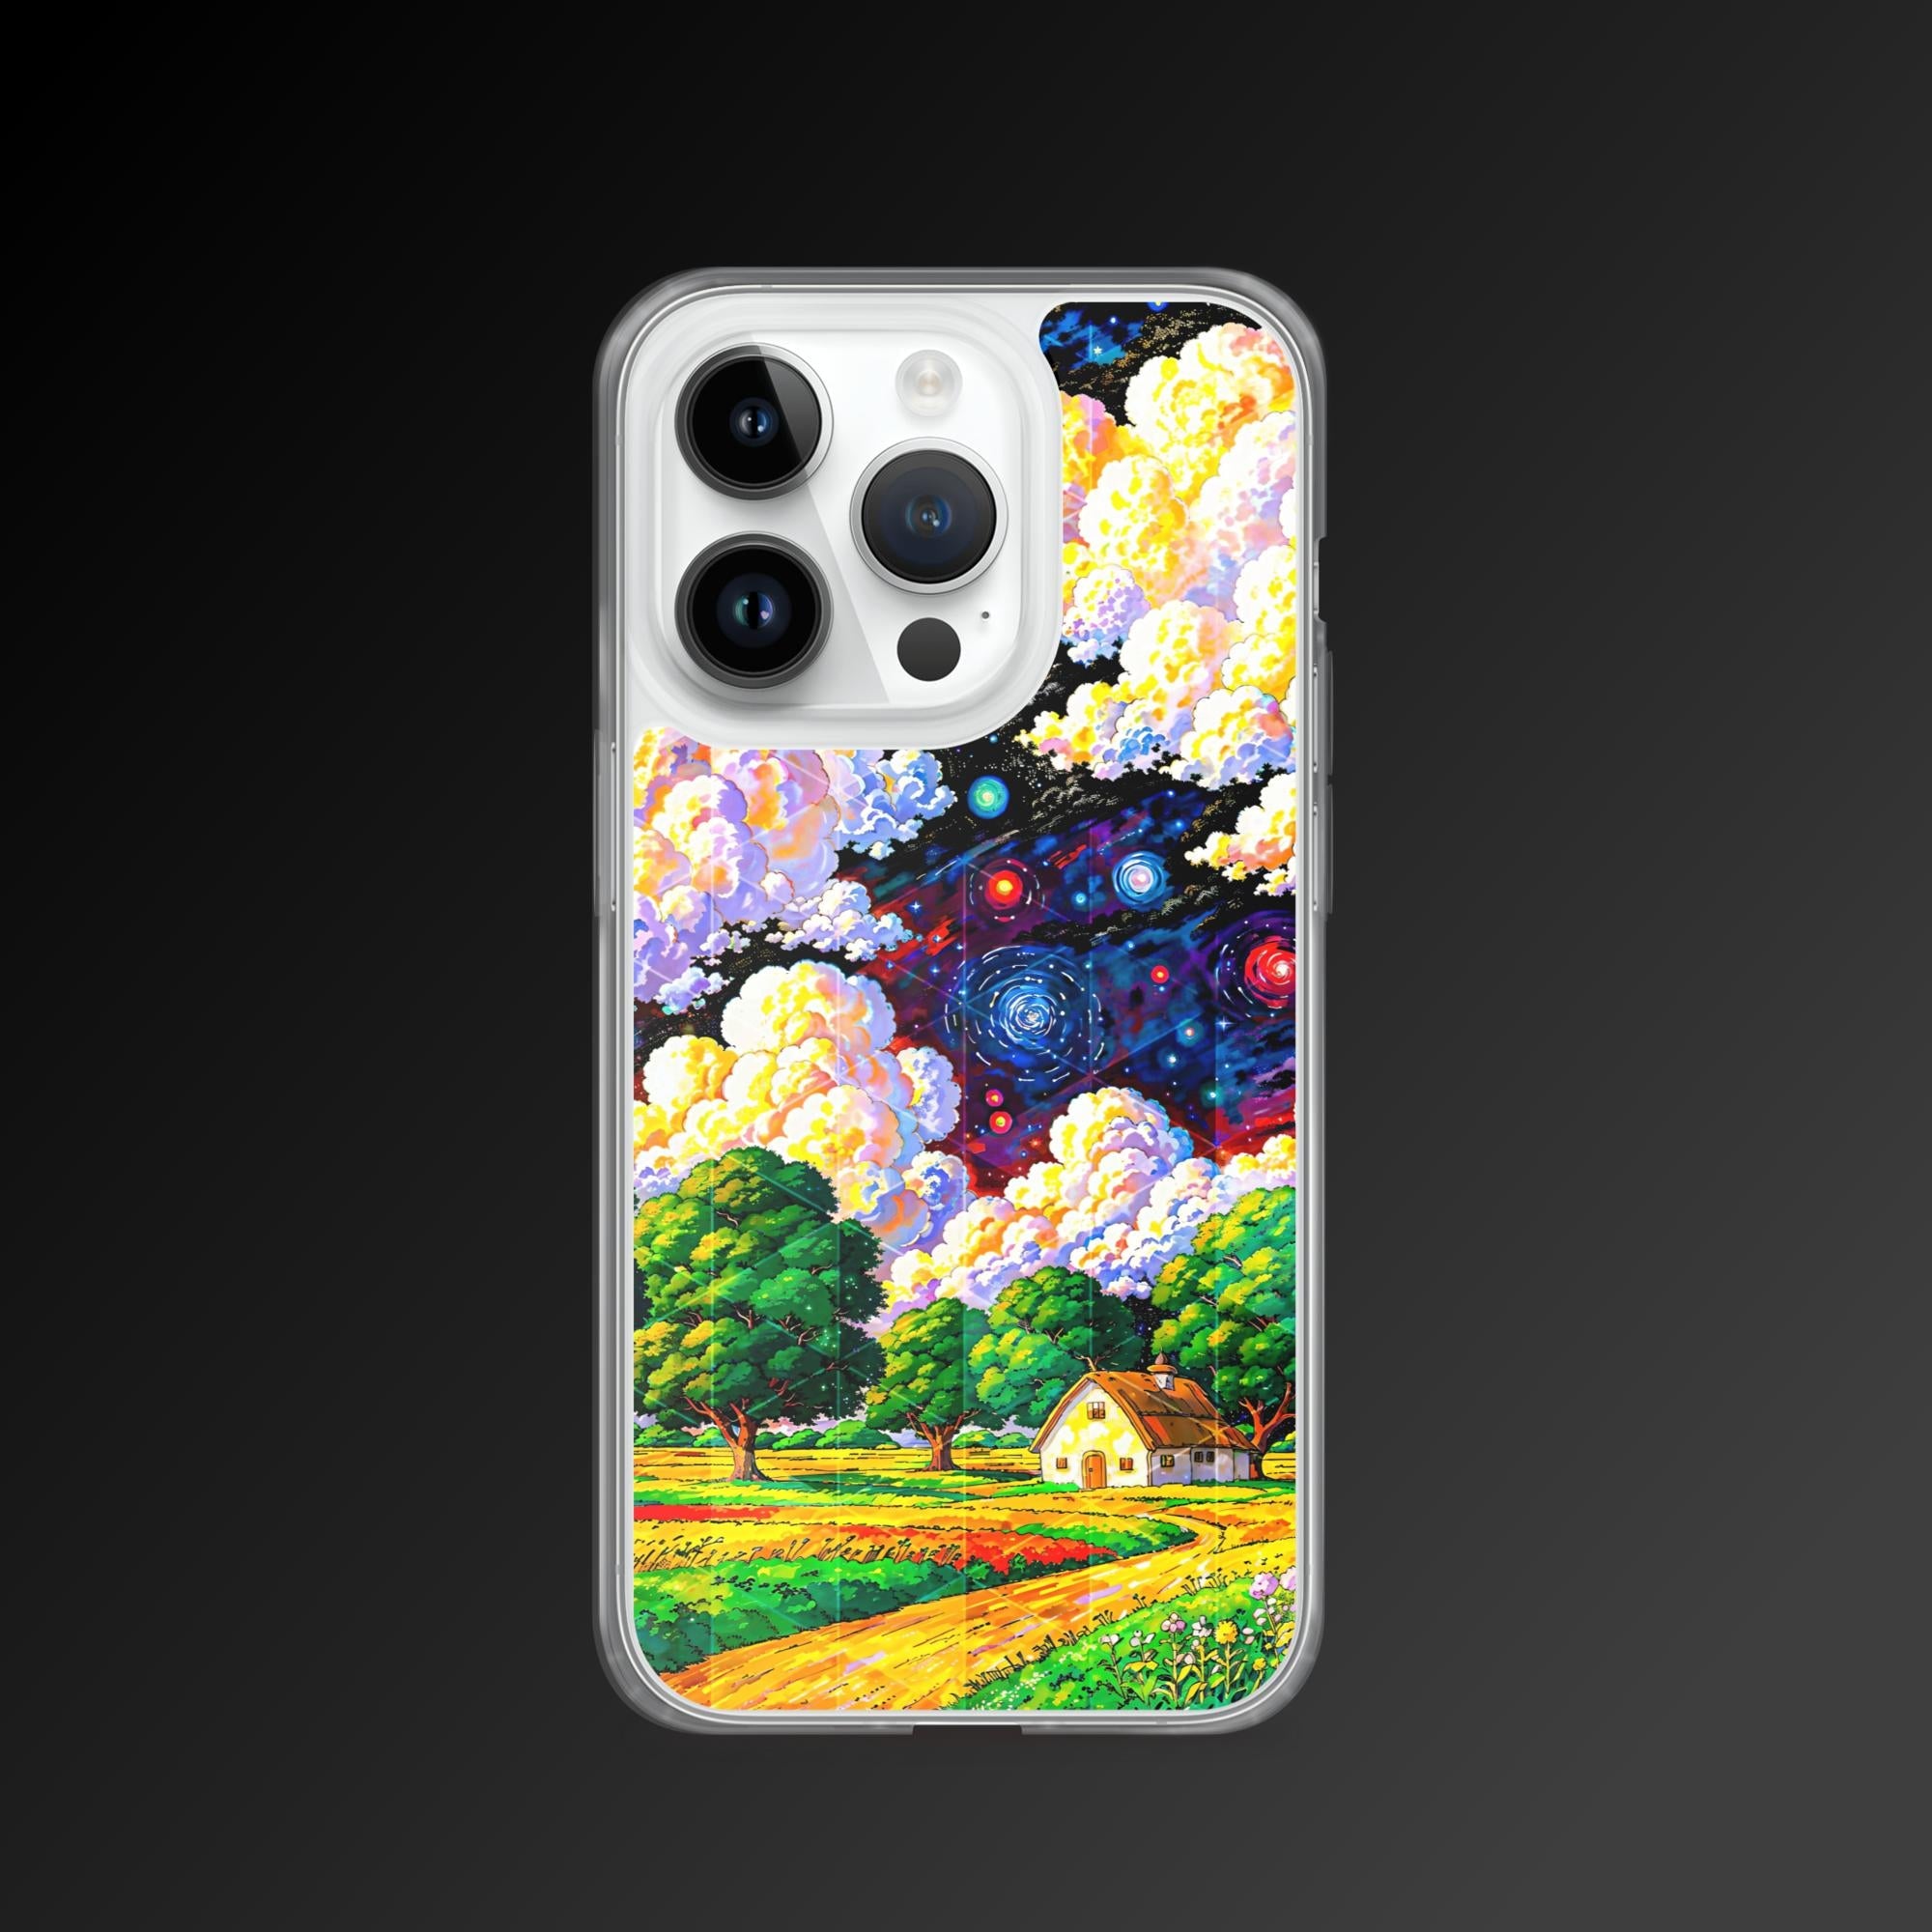 "Celestial cluster" clear iphone case - Clear iphone case - Ever colorful